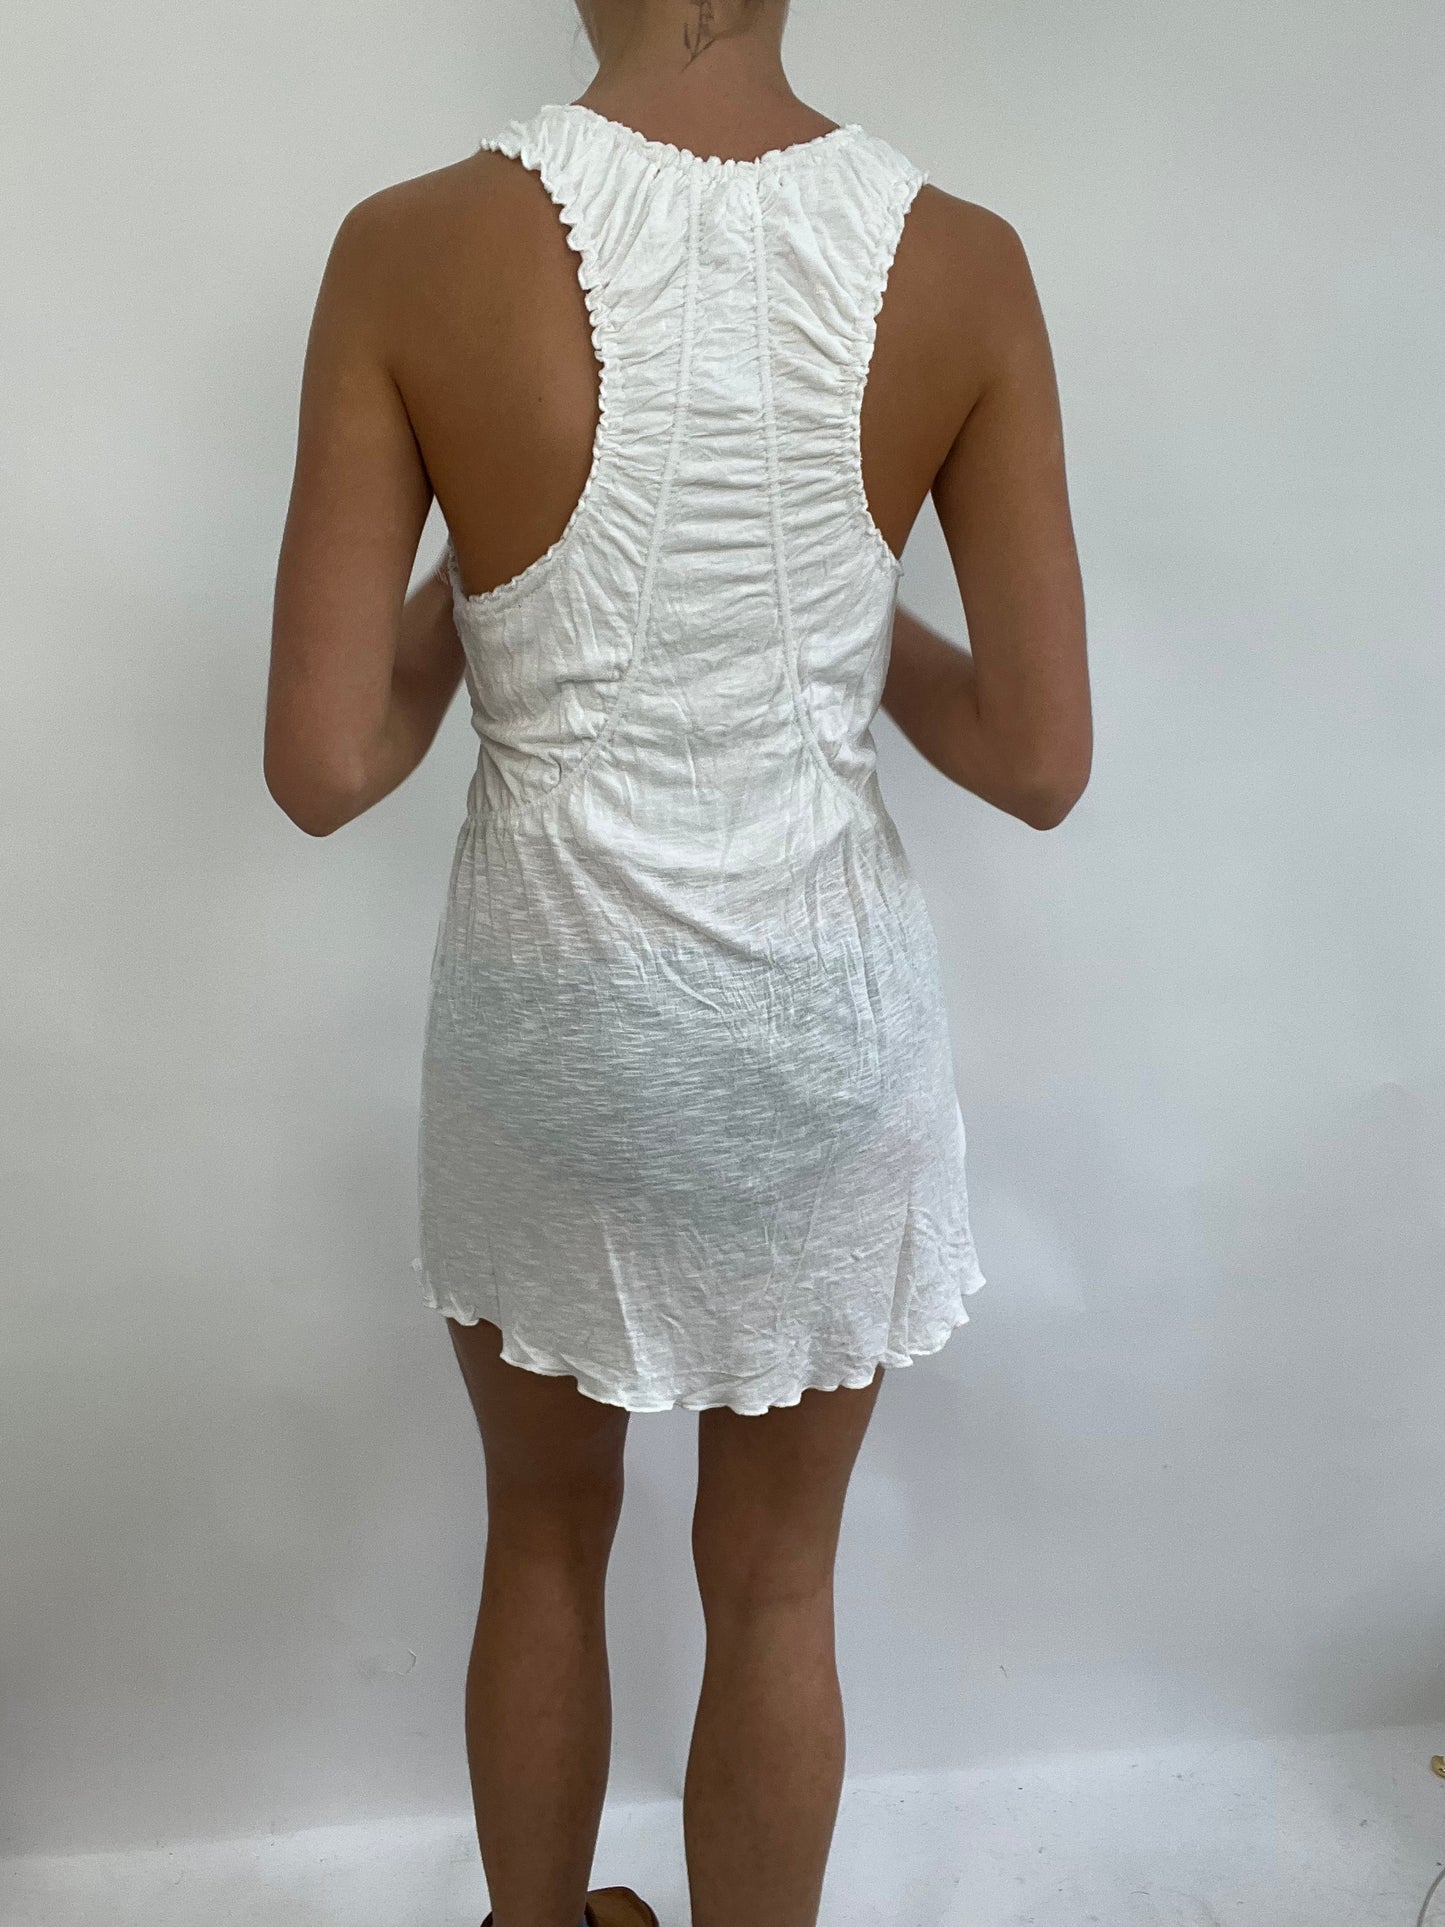 COACHELLA DROP | small white stretchy dress with v neck detail, ruching around the straps and small flower detail on the bottom